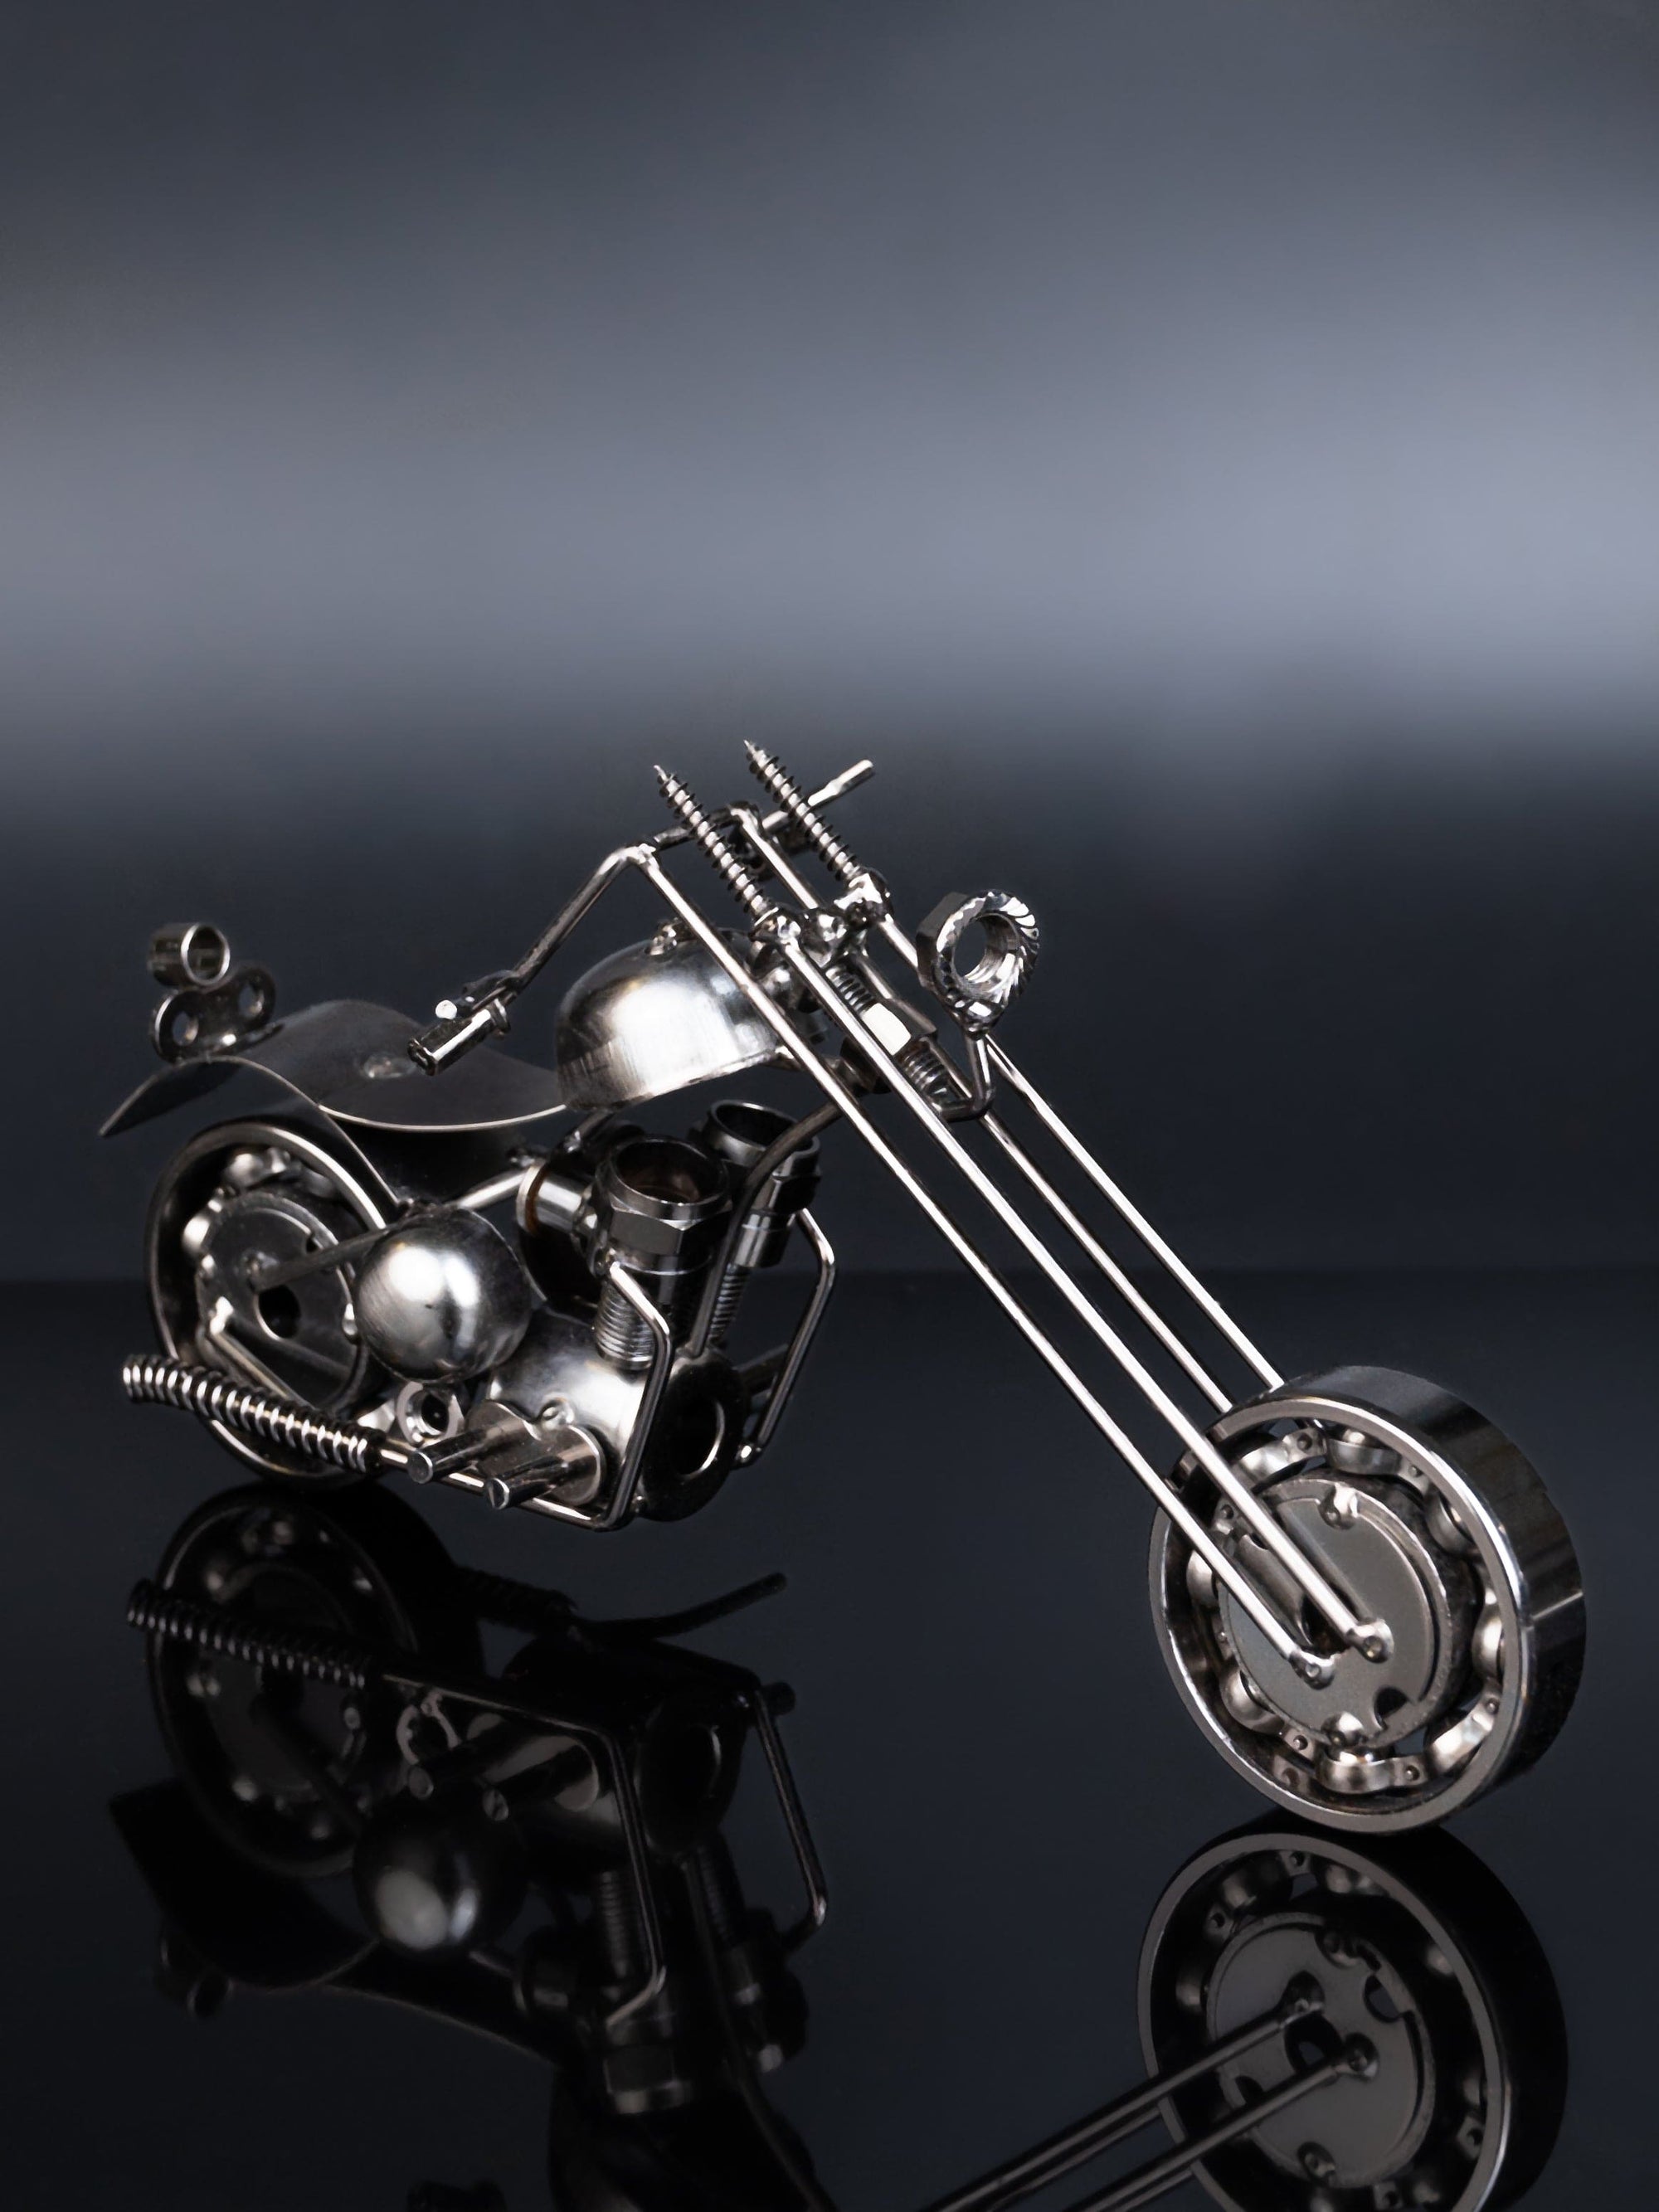 Metal Crafted Ghost Rider Bike Miniature Replica for Home Office Decor - 9 inches